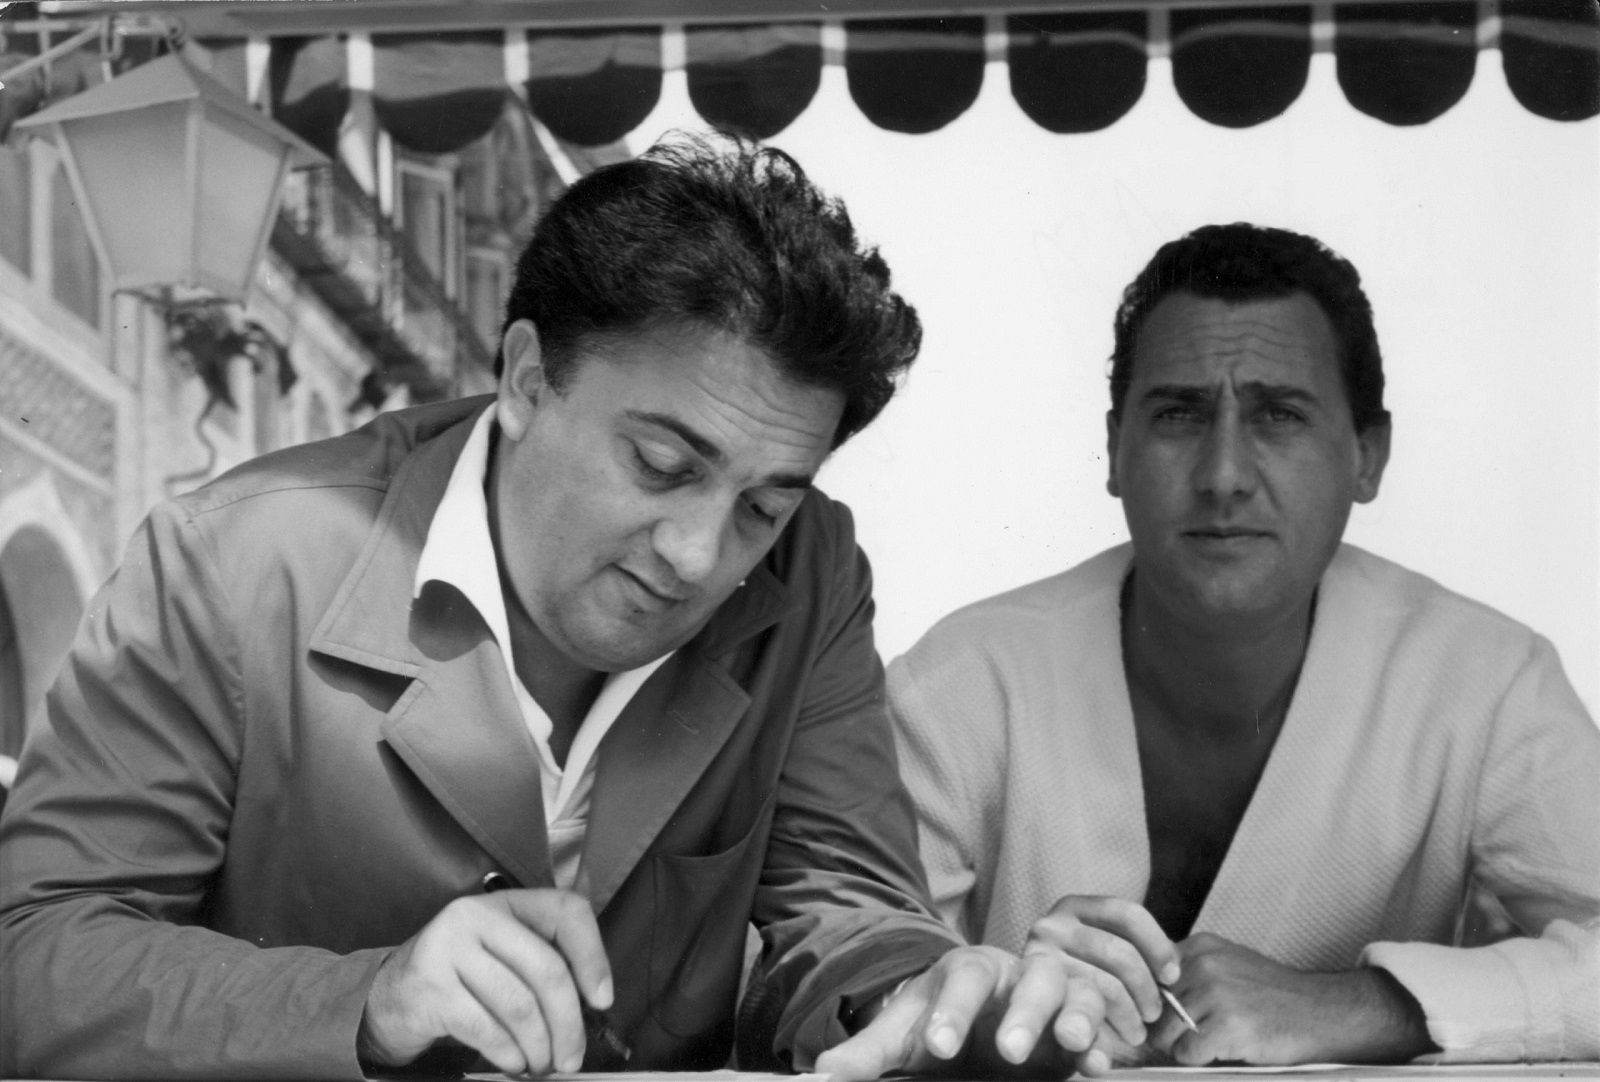 Alberto Sordi, Federico Fellini at the Venice Film Festival 1953- In case of set scenes, it is forbidden to reproduce the photograph out of context of the promotion of the film. It must be credited to the Film Company and the photographer assigned by or authorized by on the set by the Film Company.